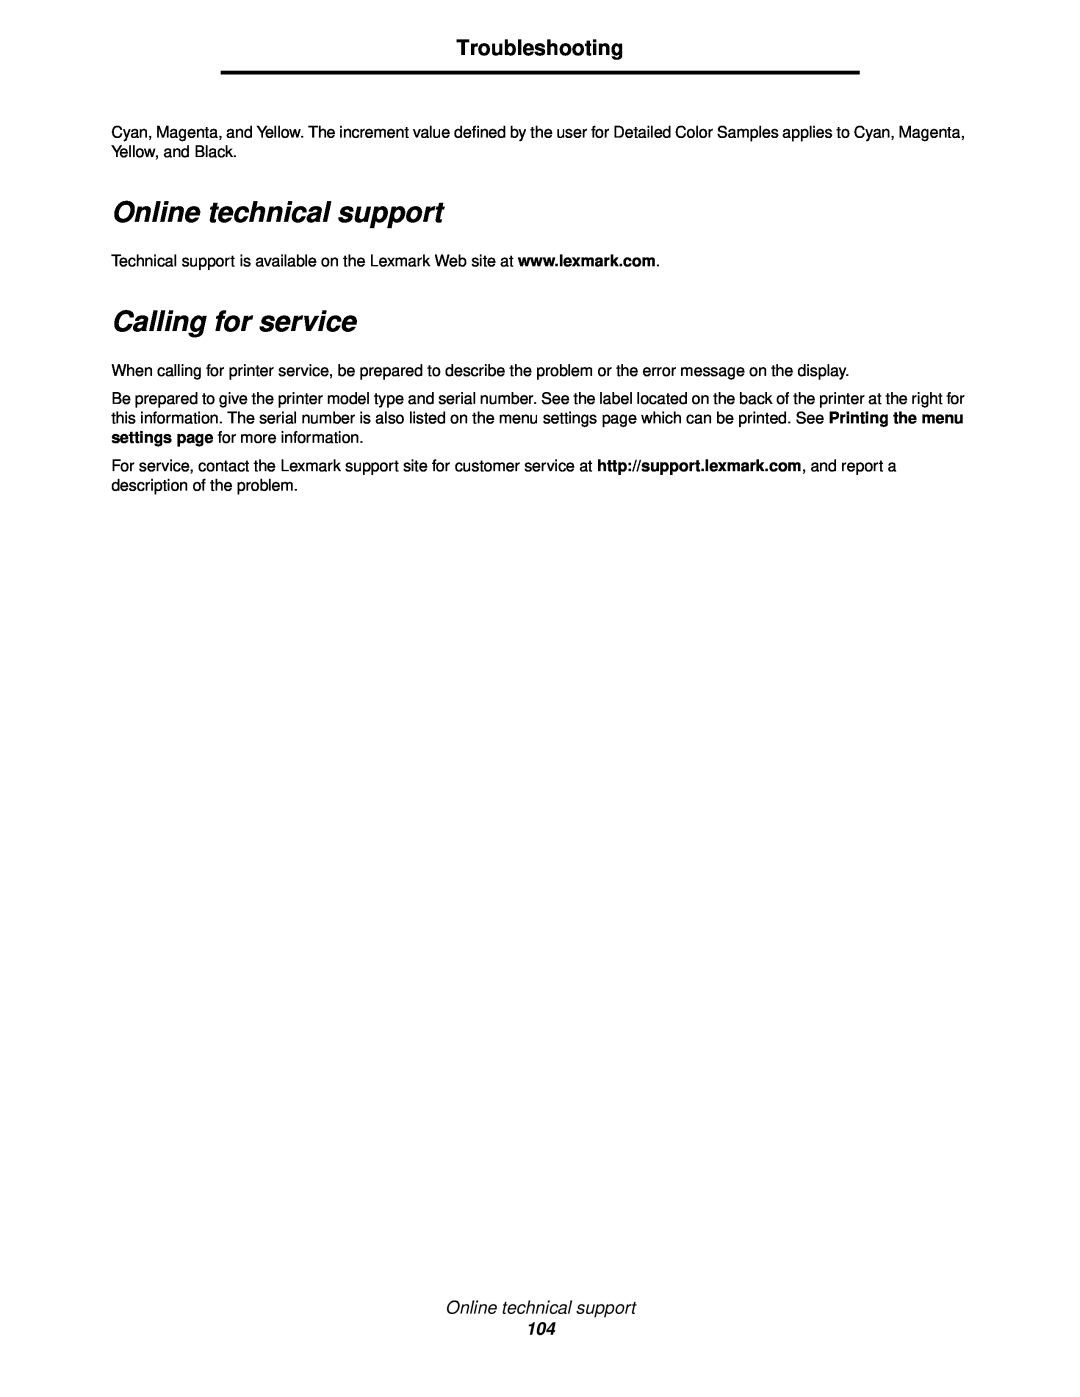 Lexmark C522, C524, C520 manual Online technical support, Calling for service, Troubleshooting 